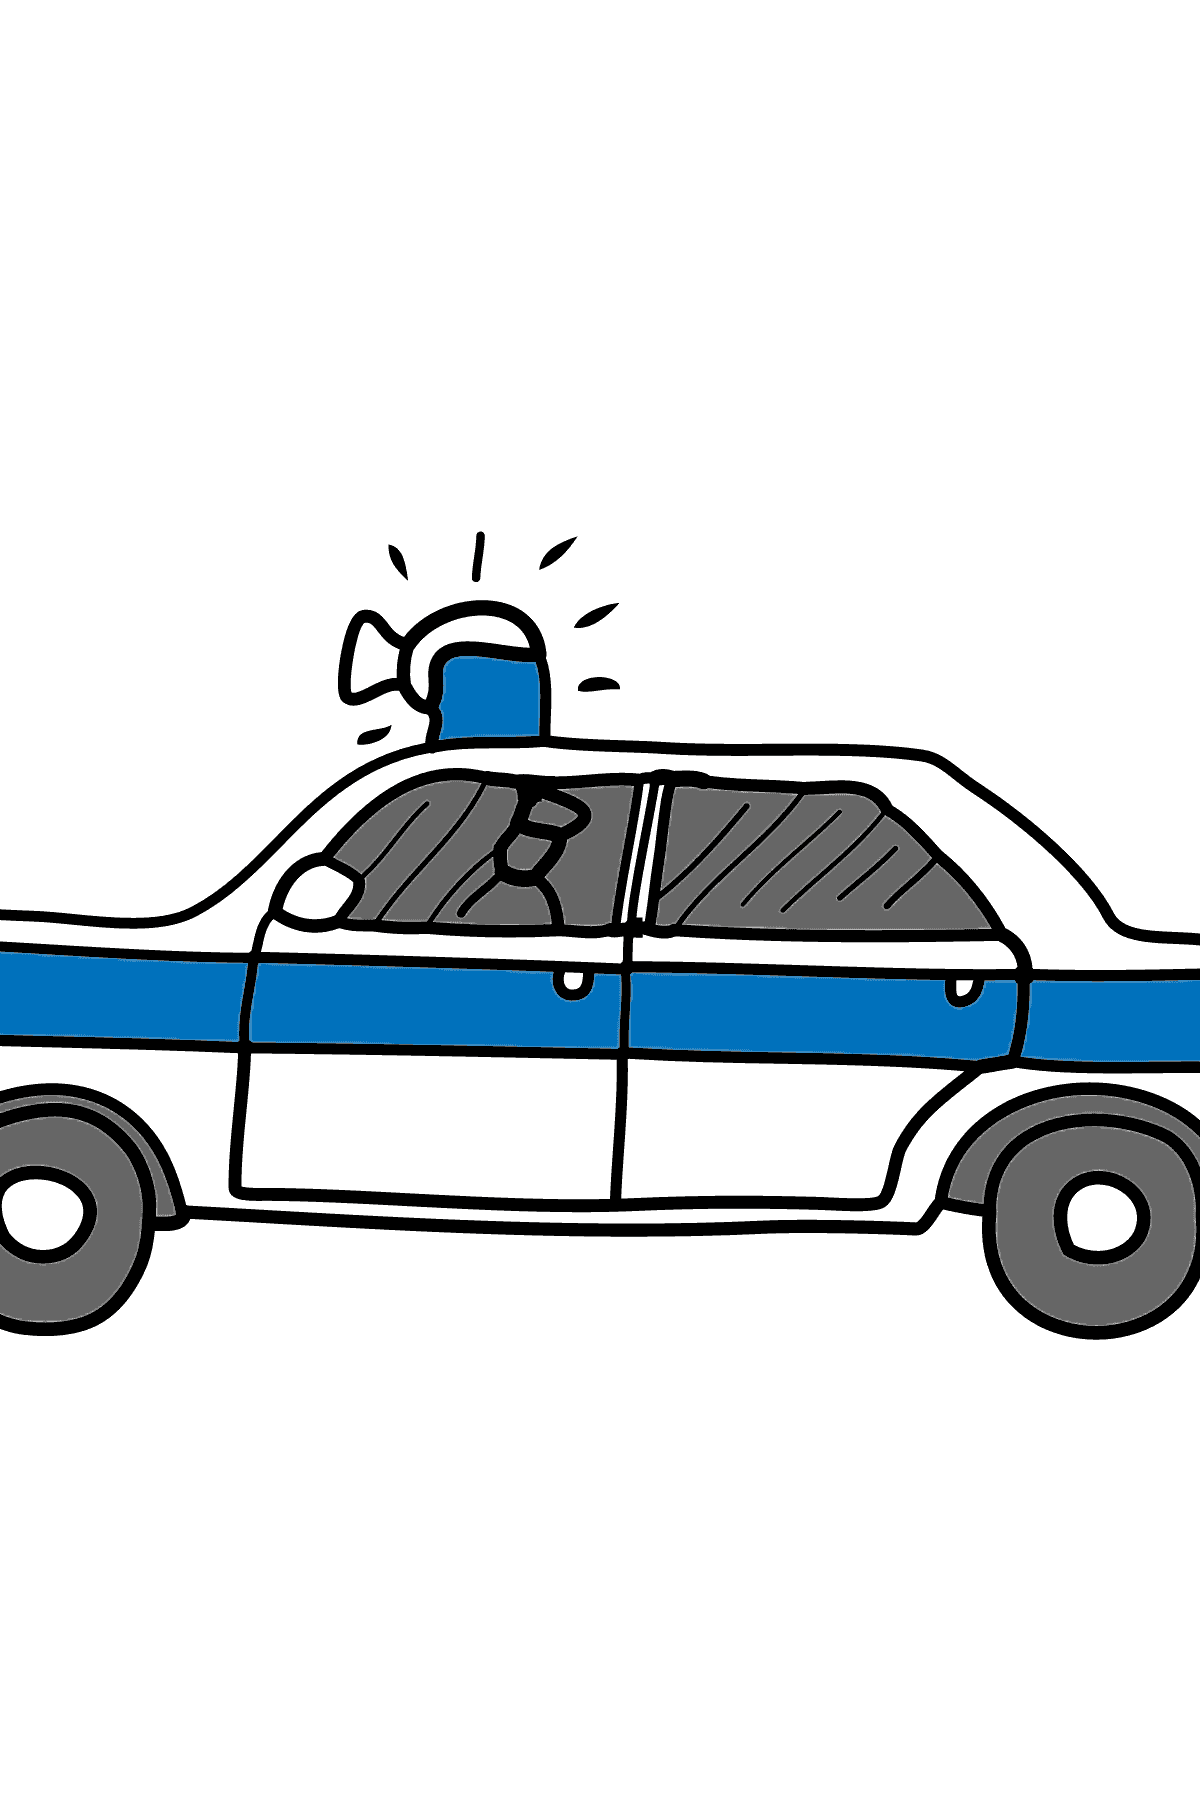 Coloring Page - A Police Car for Kids 